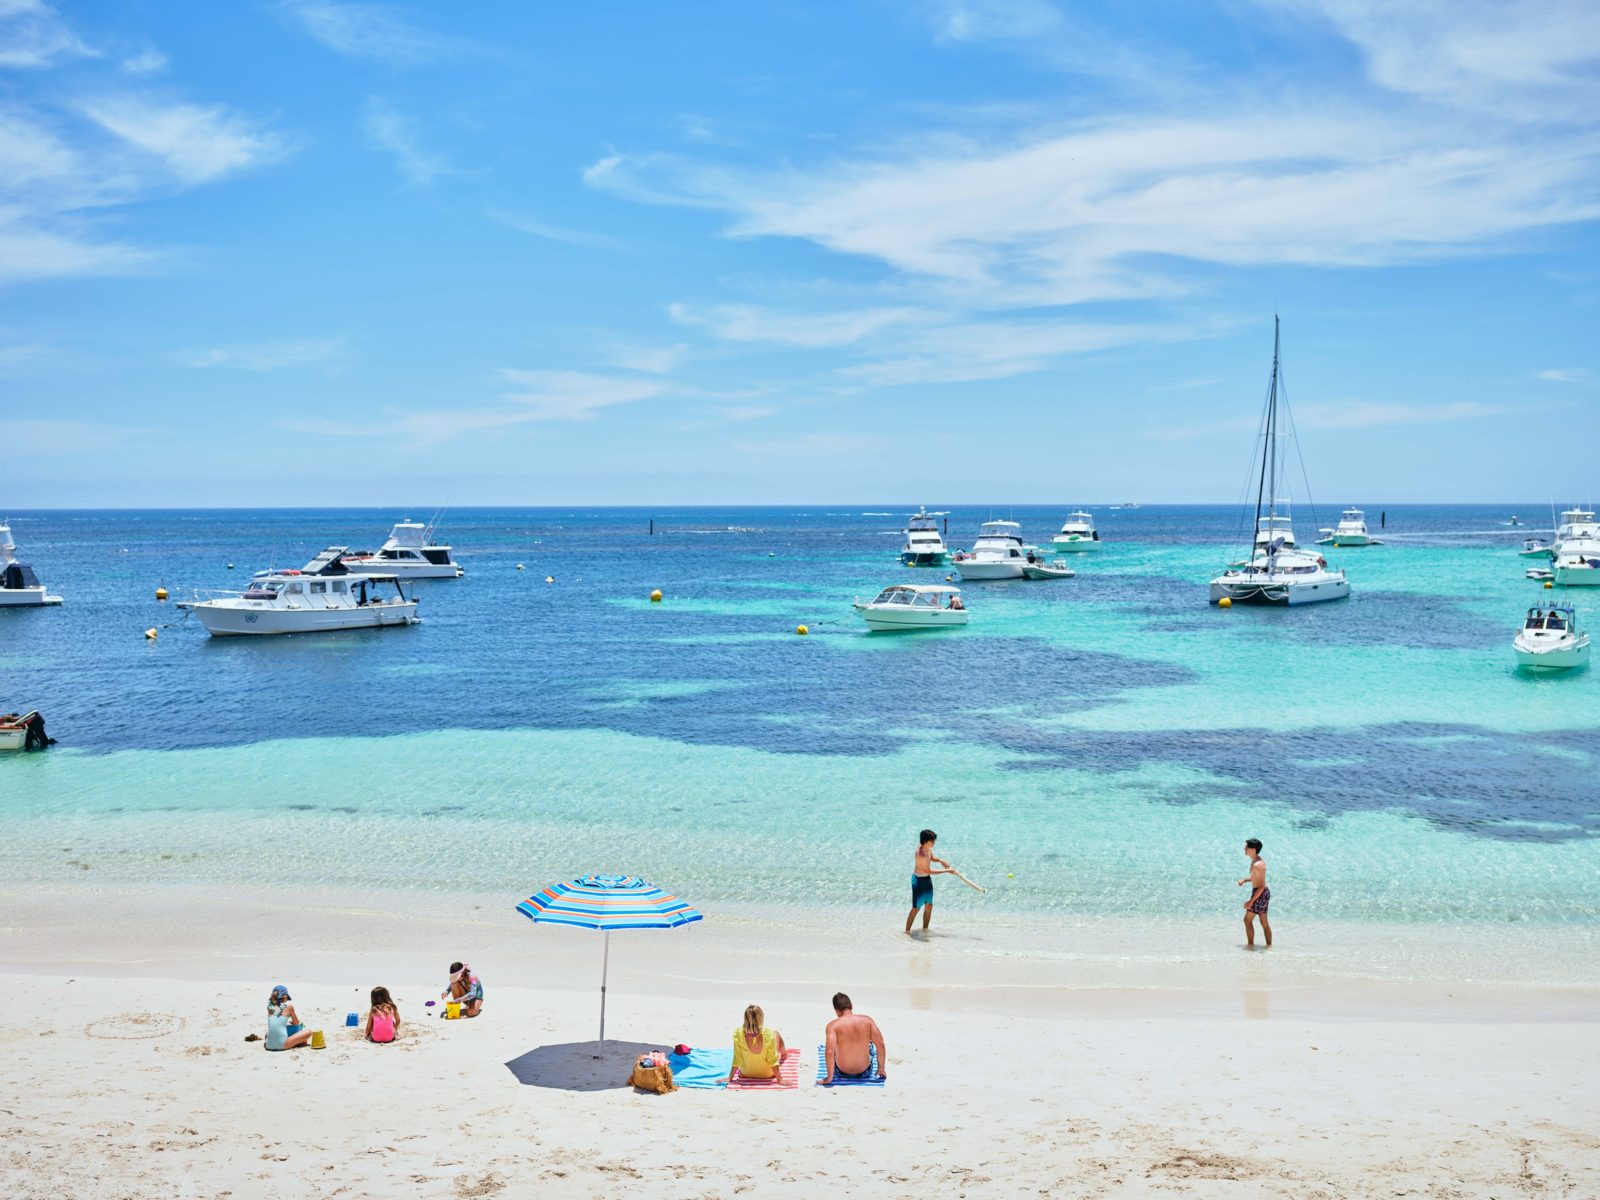 People sitting on a white sandy beach, looking at boats on the water.